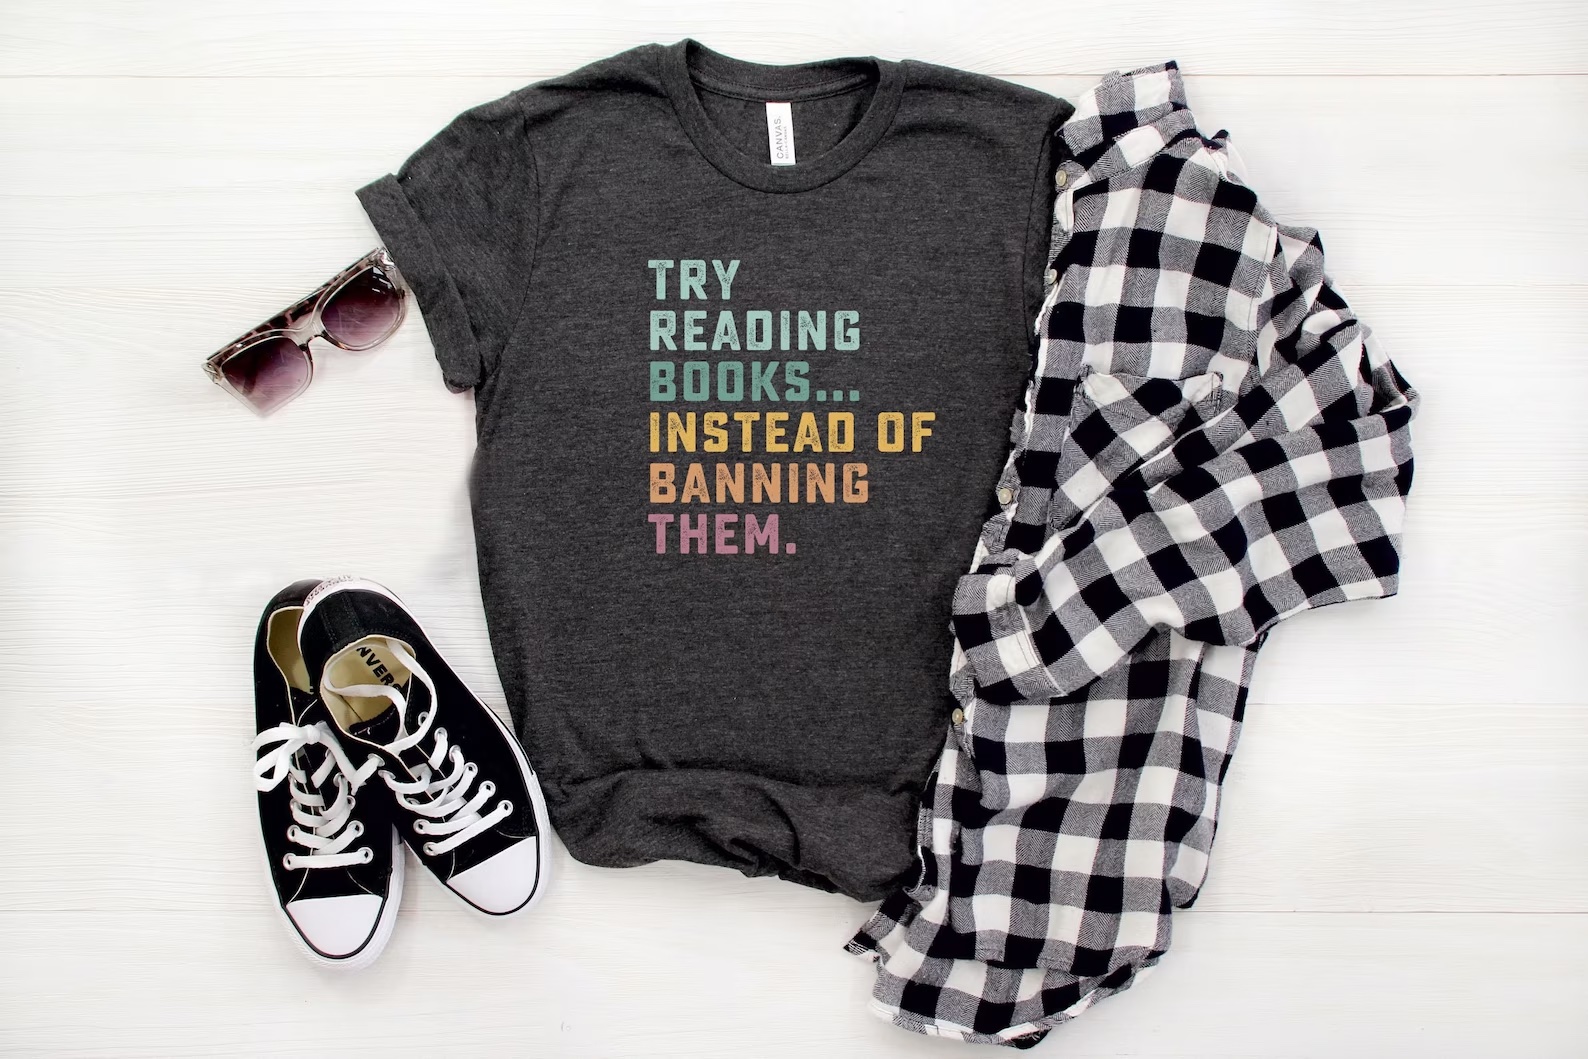 a photo of a t-shirt that reads "Try Reading Books . . . Instead of Banning Them